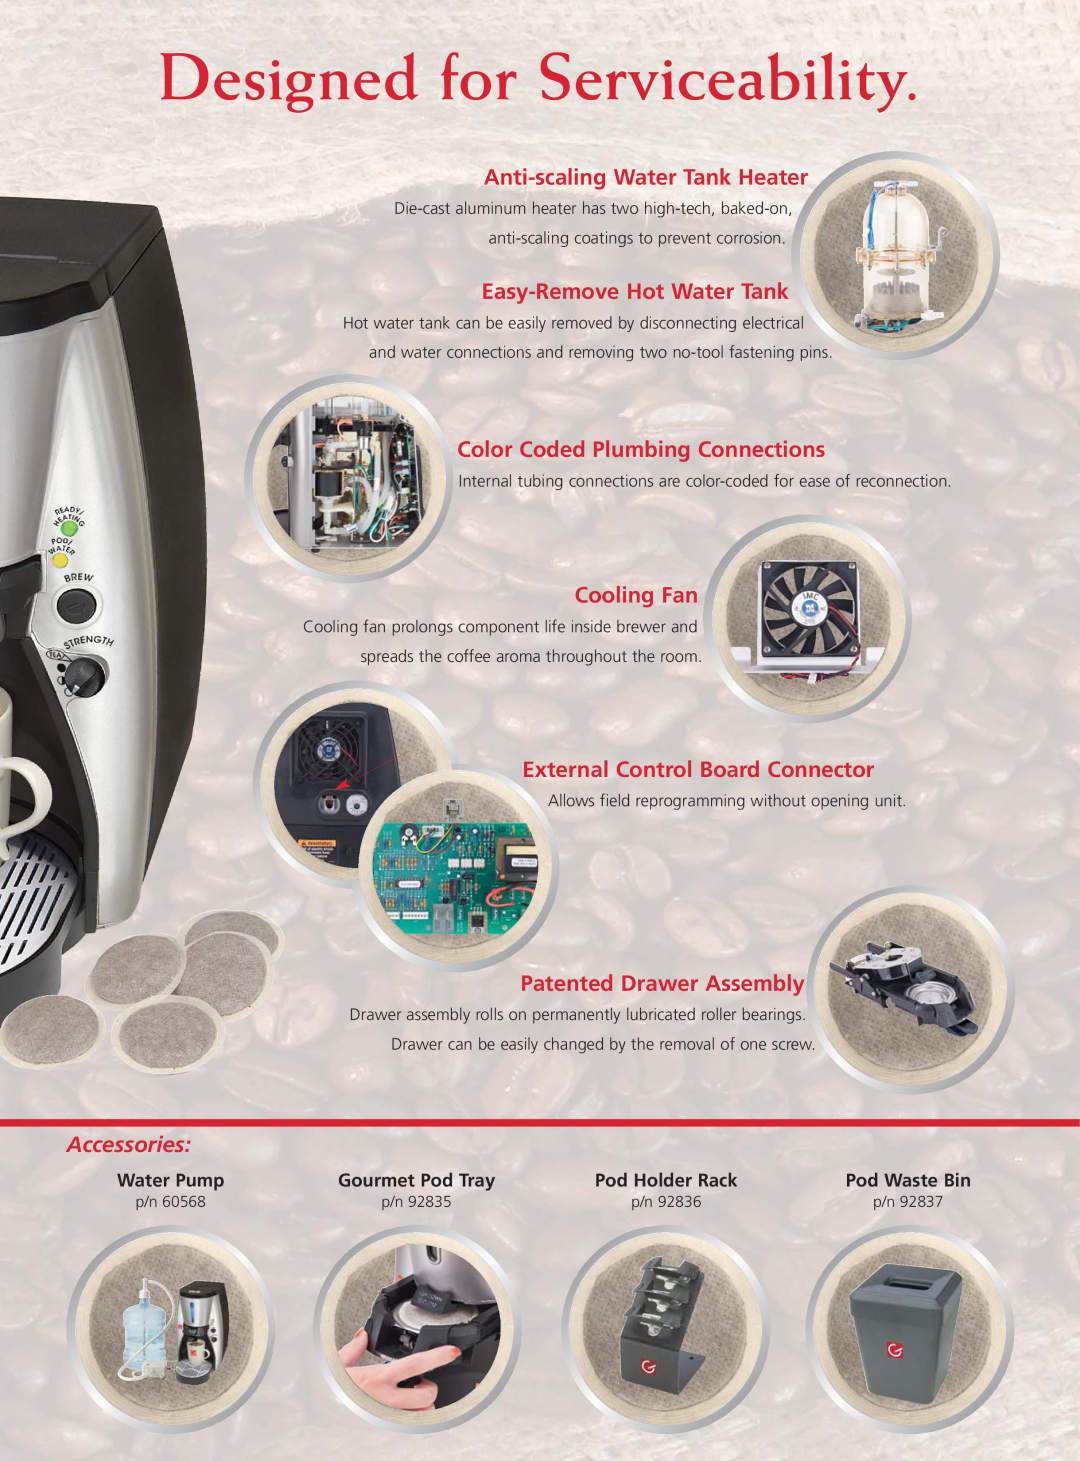 Grindmaster Single Cup Pod Brewer Designed for Serviceability, Anti-scaling Water Tank Heater, Easy-Remove Hot Water Tank 